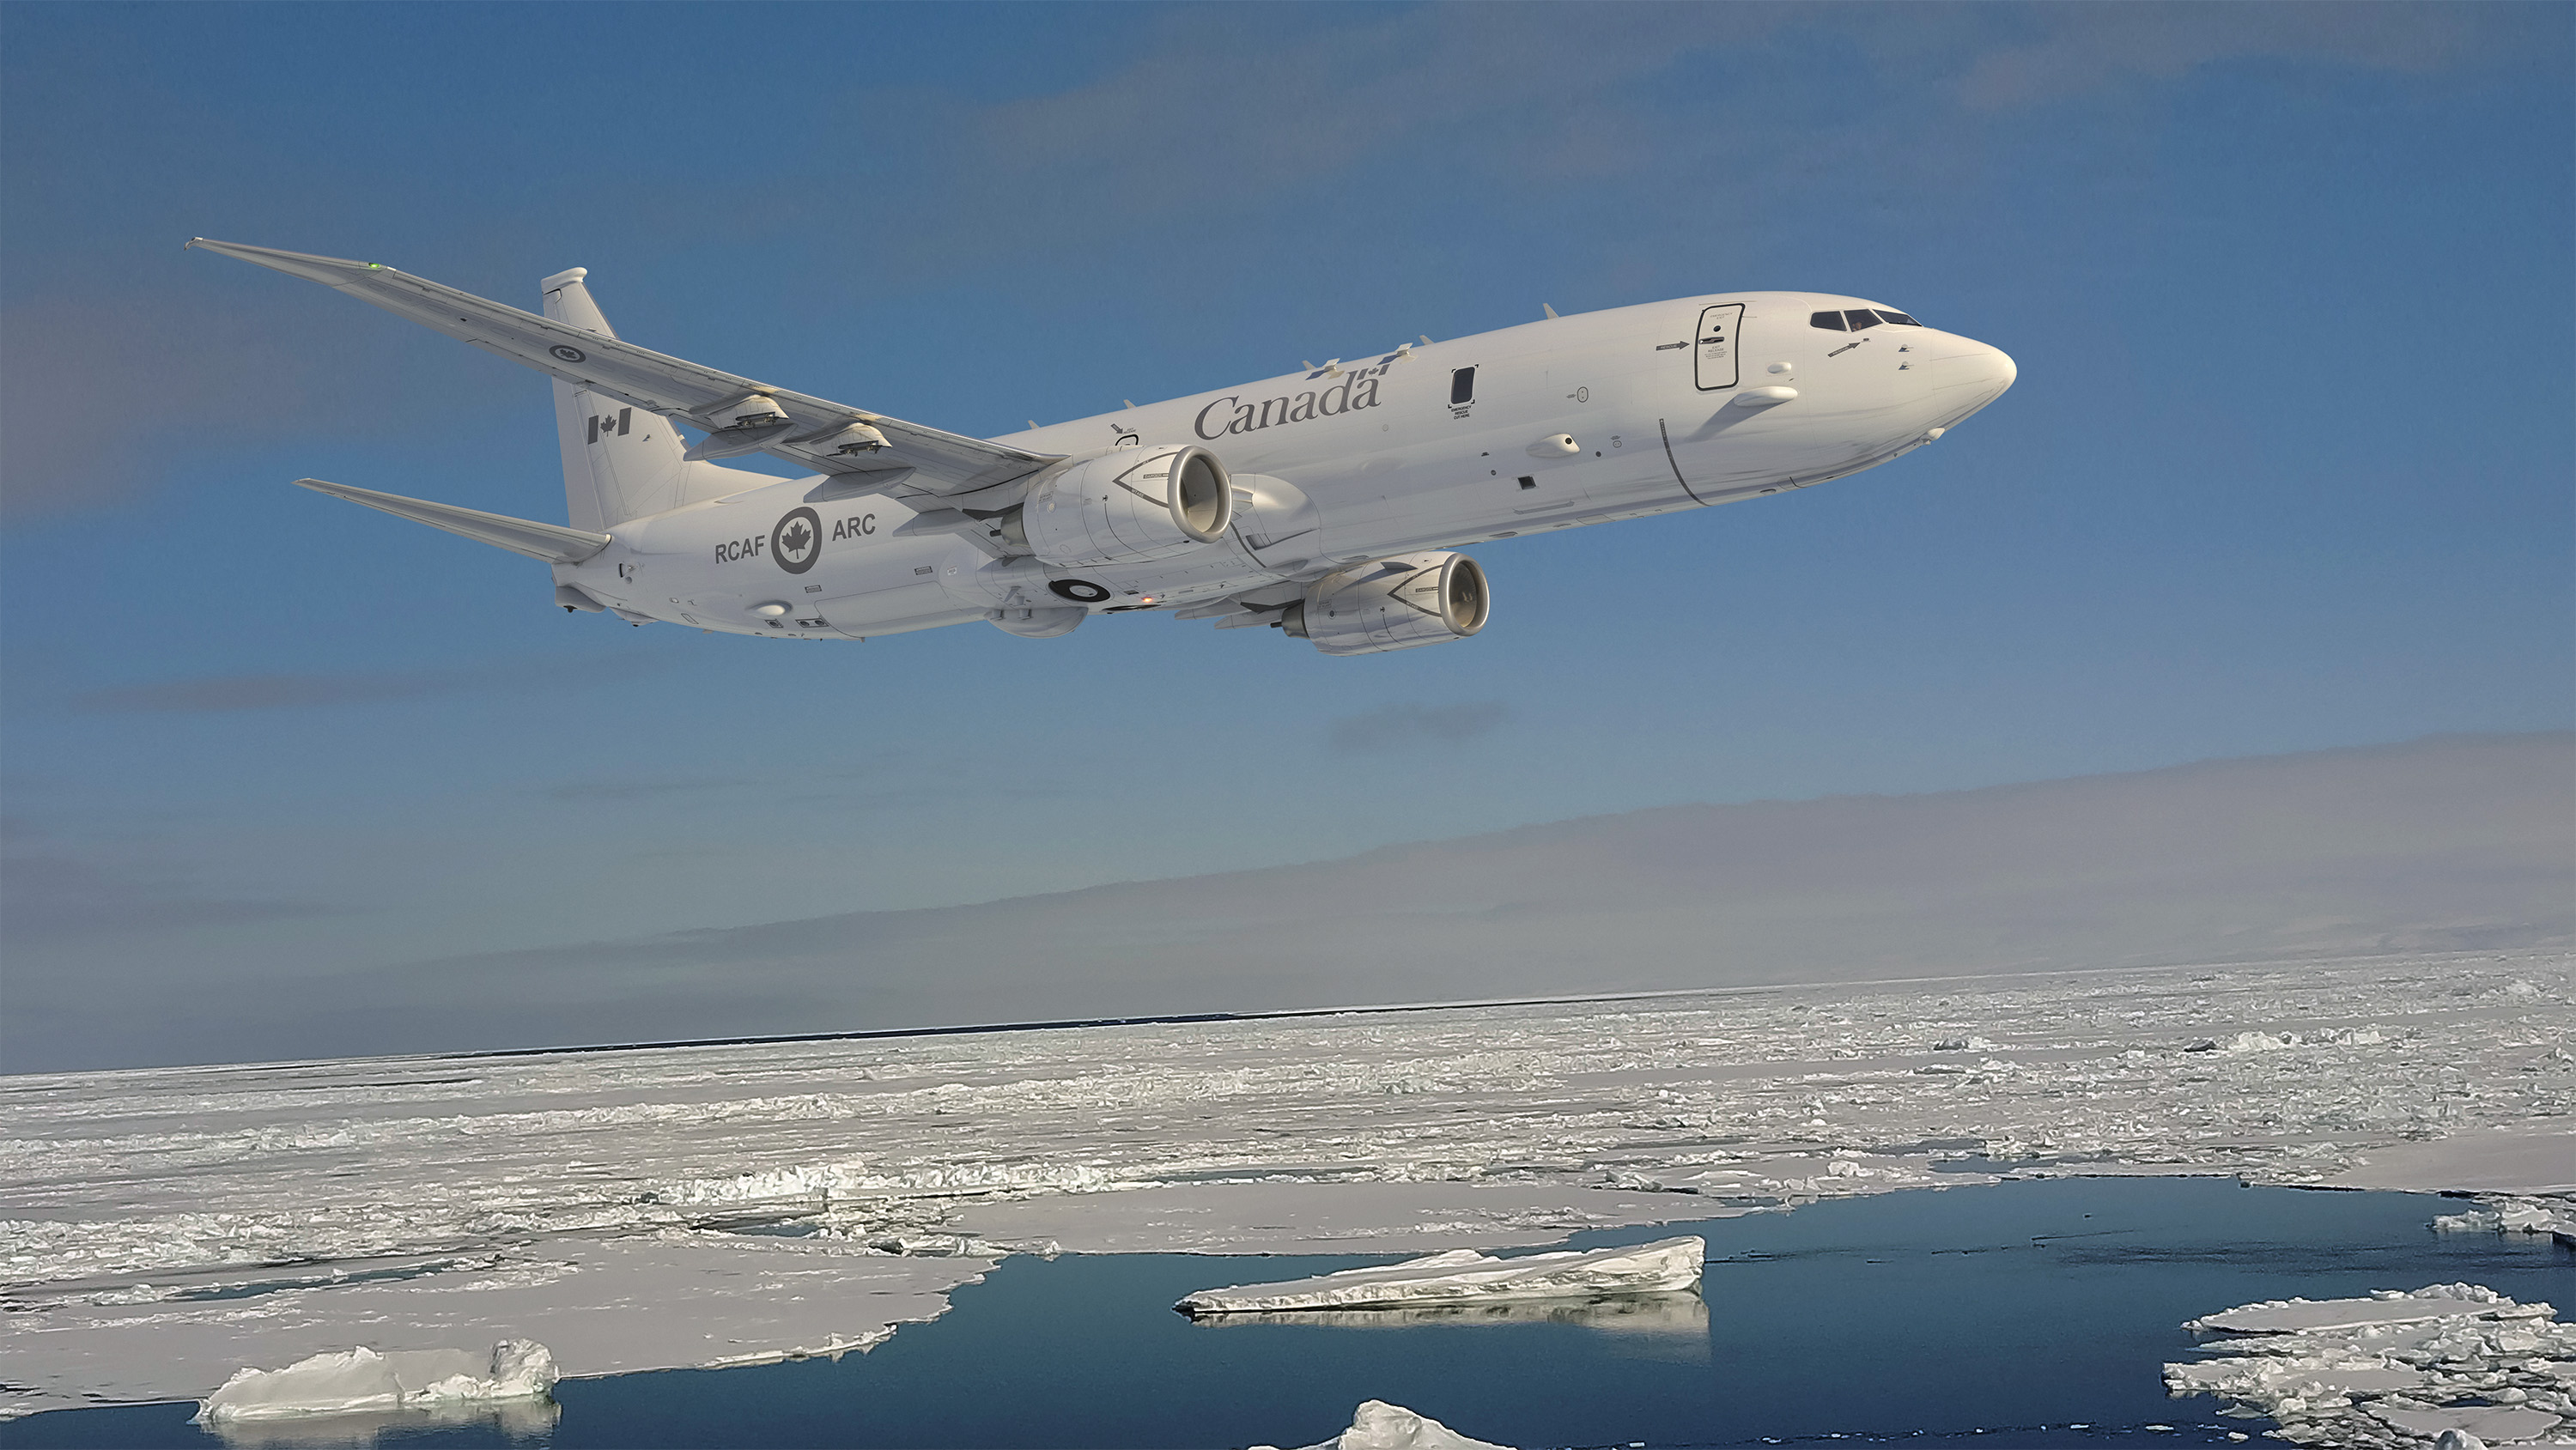 Is Canada  Inching  Closer  Towards  Announcement  Of  Acquiring  Eight  to Twelve  Boeing  P-8A Poseidon  Aircraft  ?